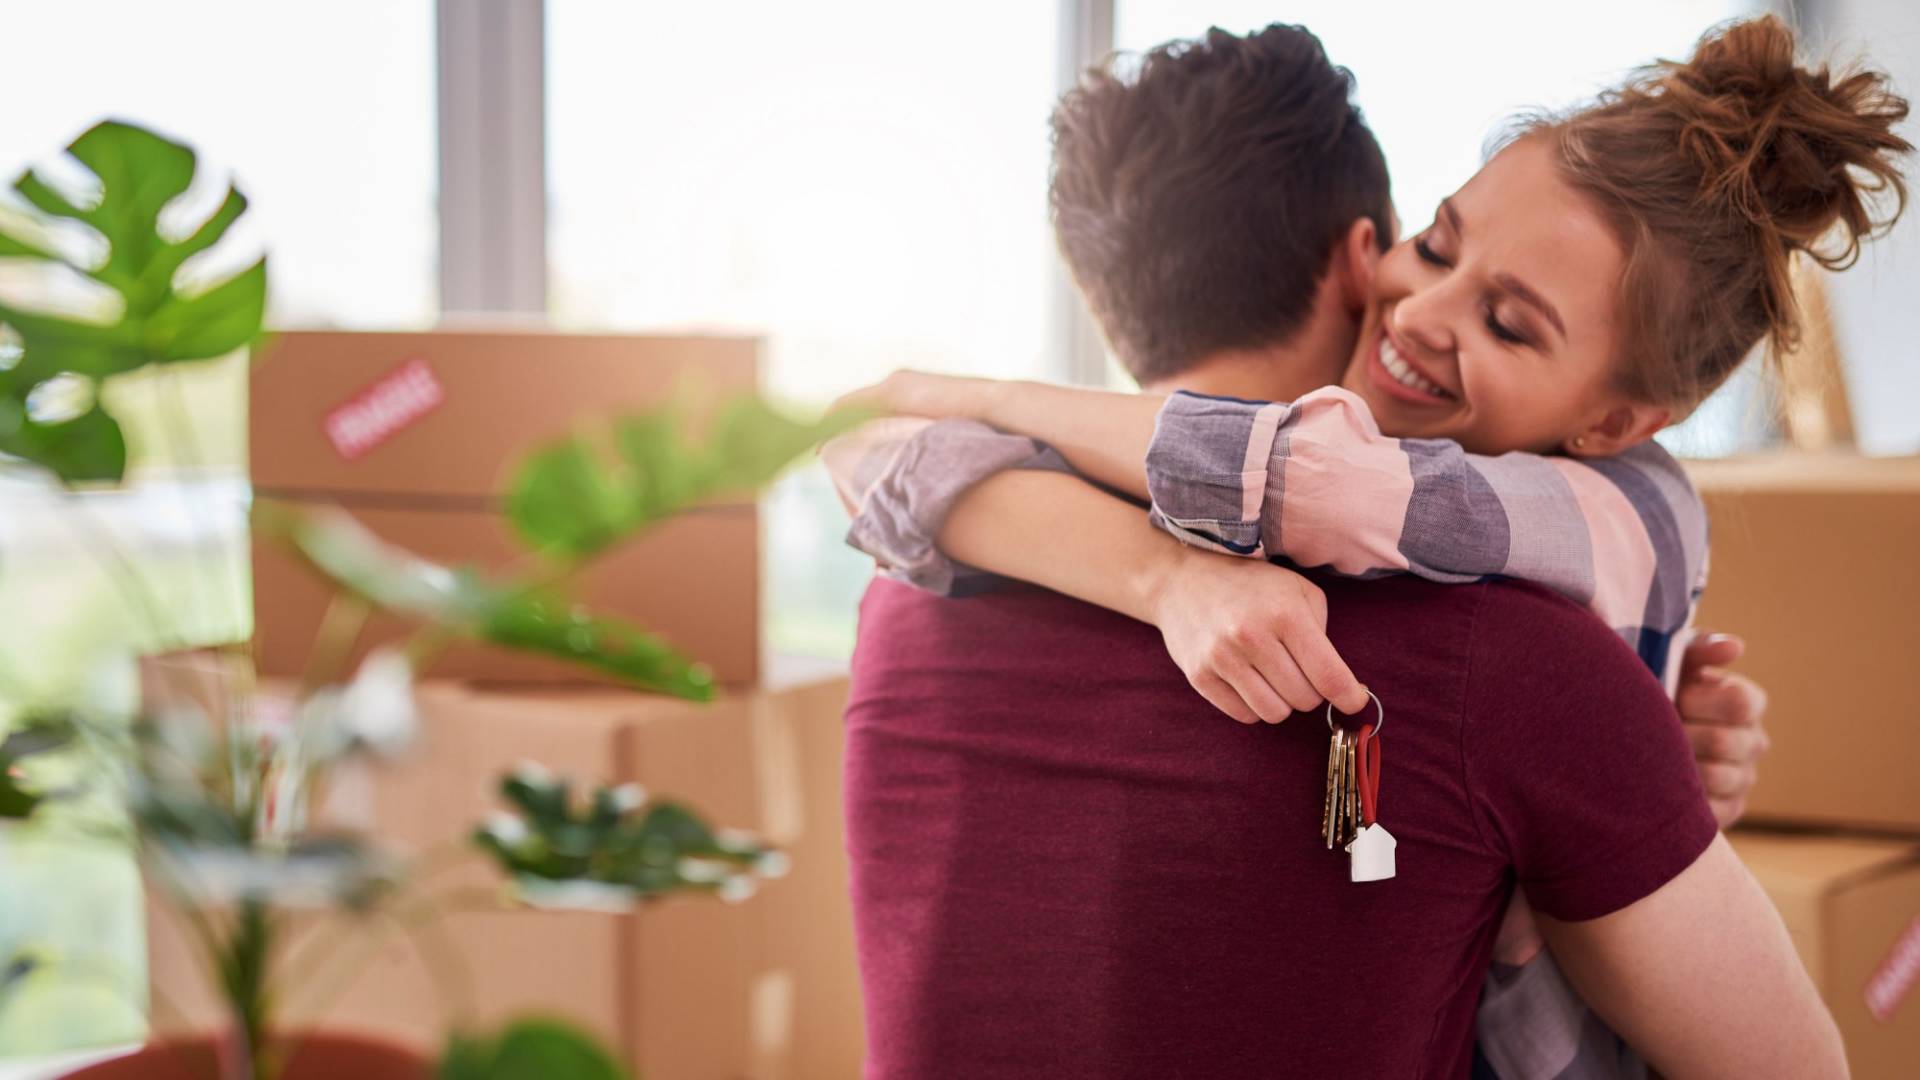 Young couple embracing in the apartment they have just moved into.